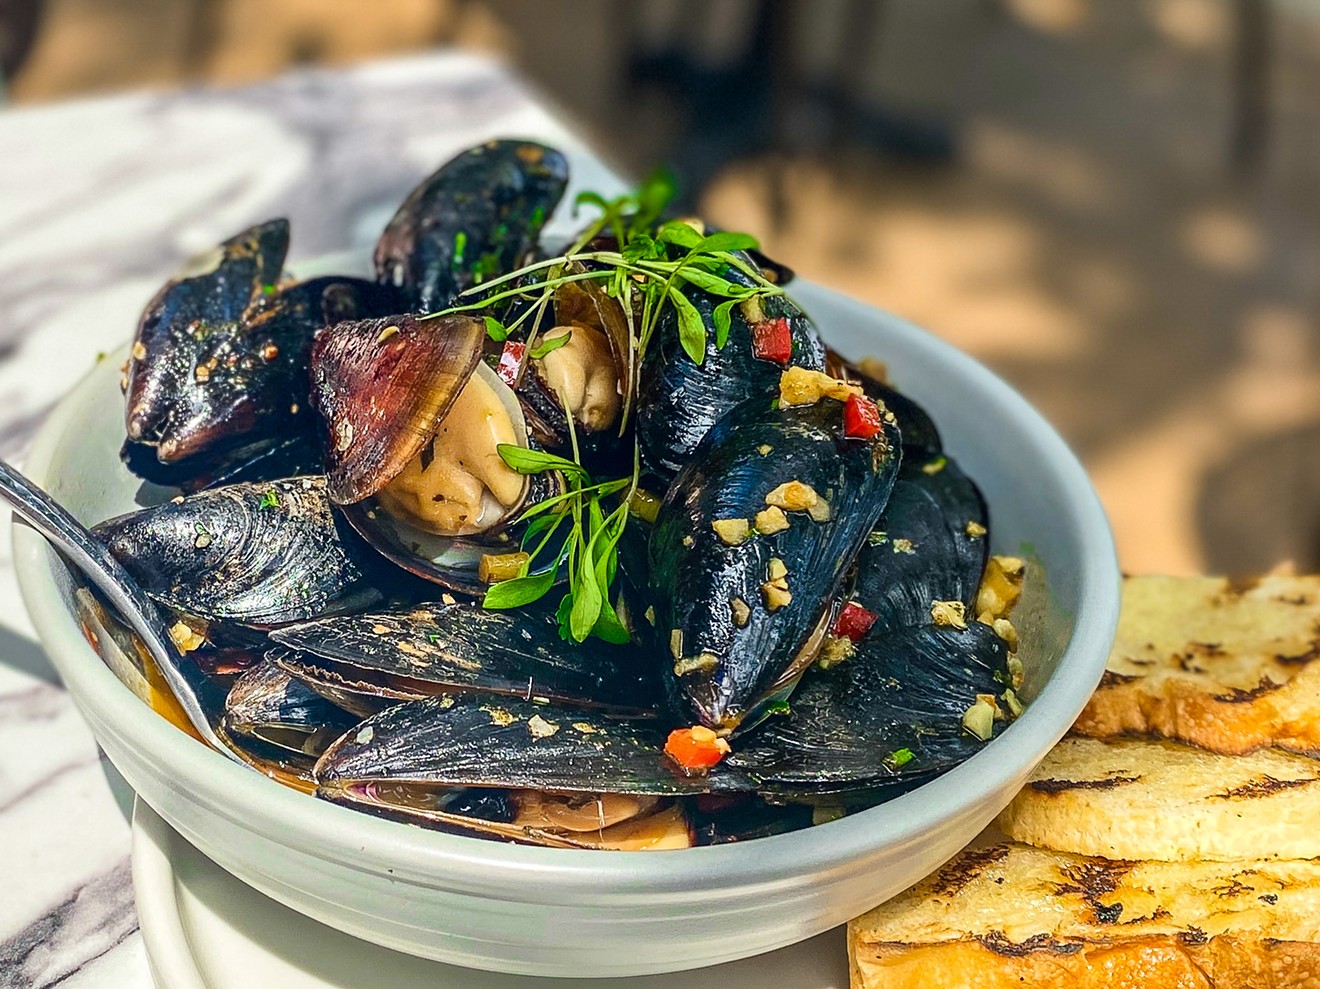 Spicy Thai-style mussels with grilled bread to sop a rich broth.